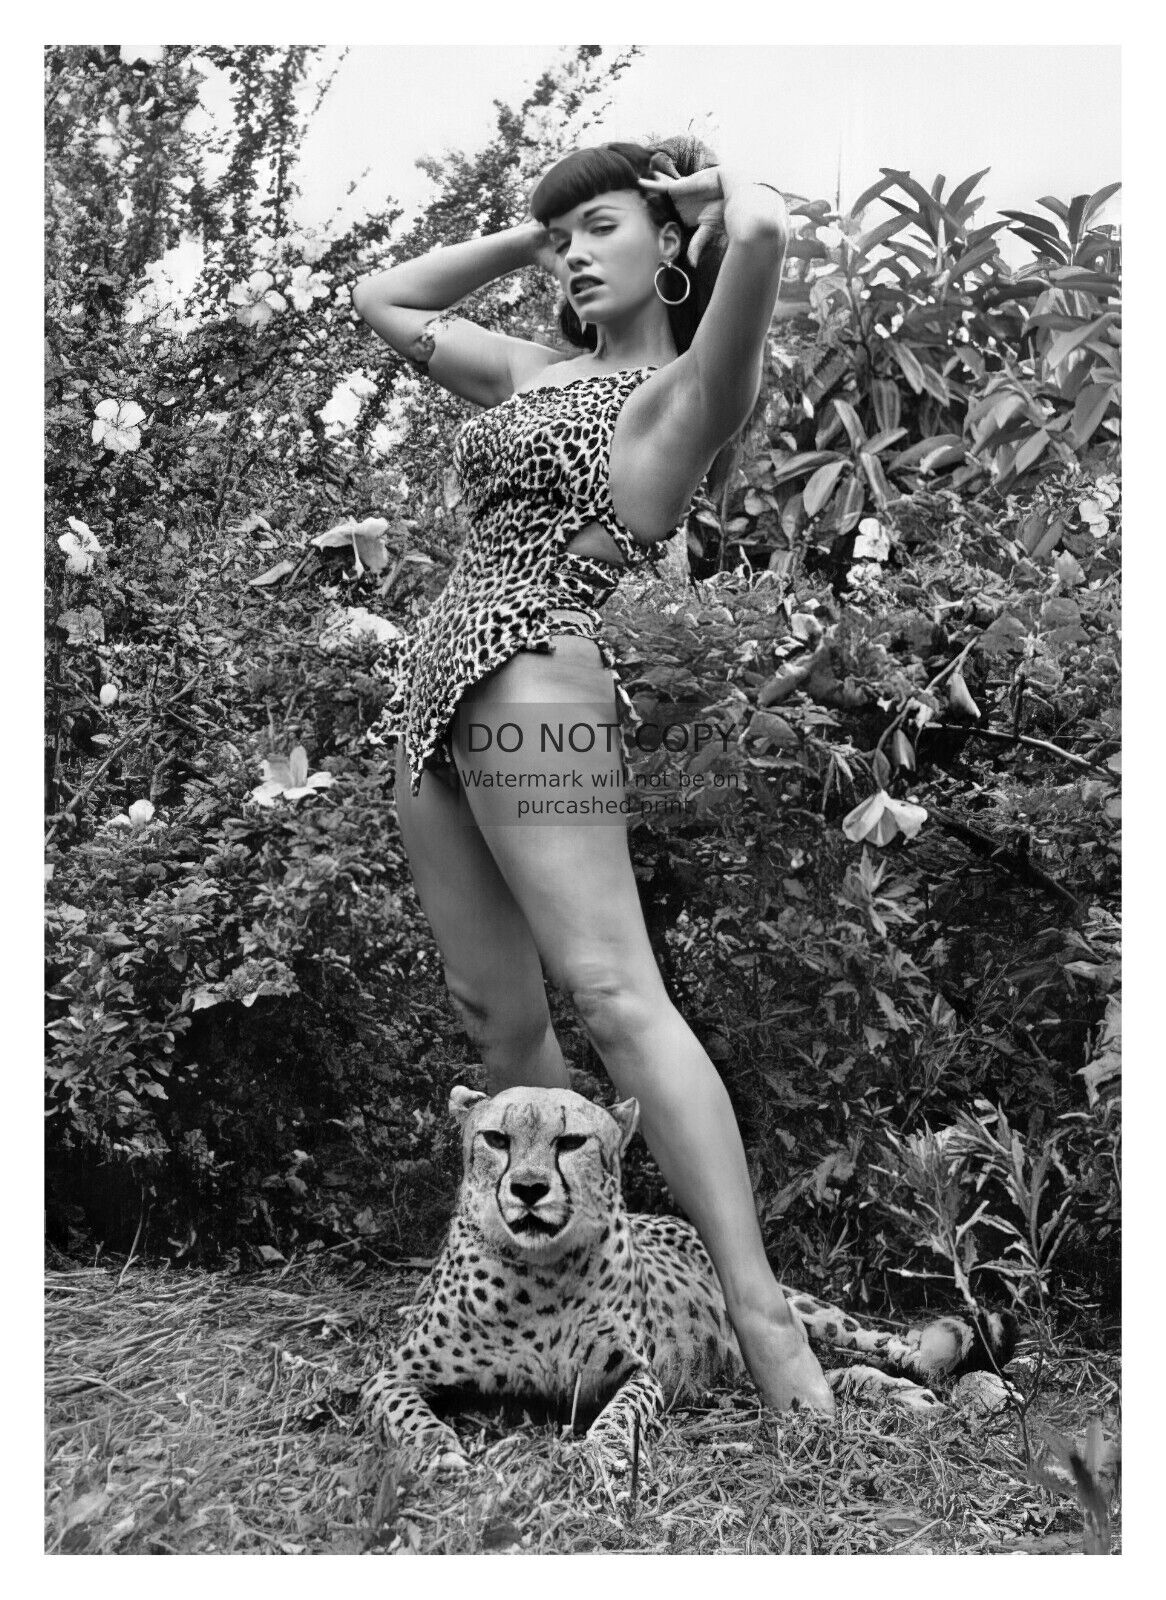 BETTIE PAGE SEXY CELEBRITY MODEL POSING WITH LION 5X7 PHOTO